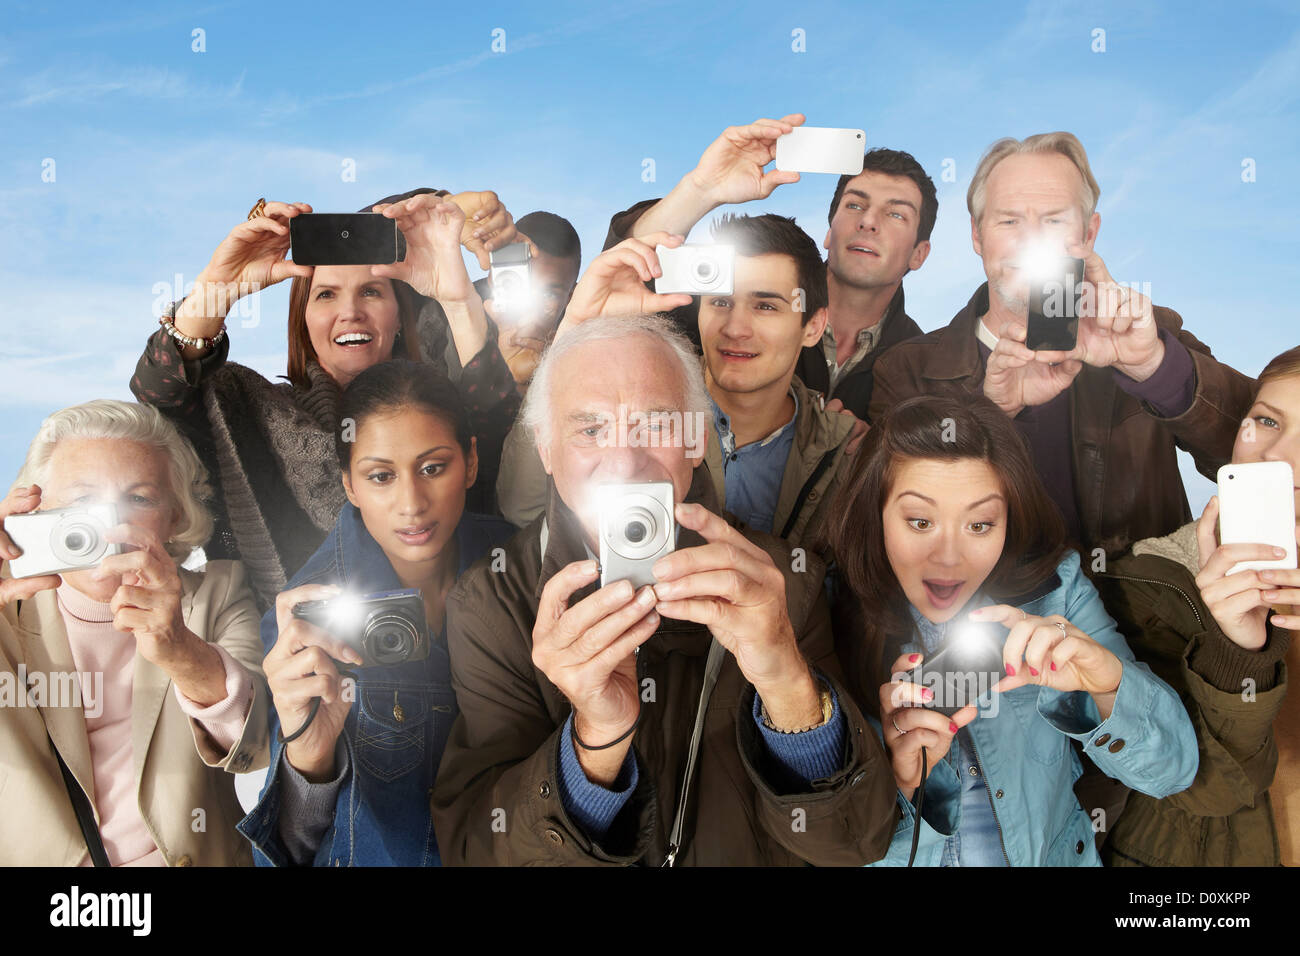 Group of people taking photographs Stock Photo